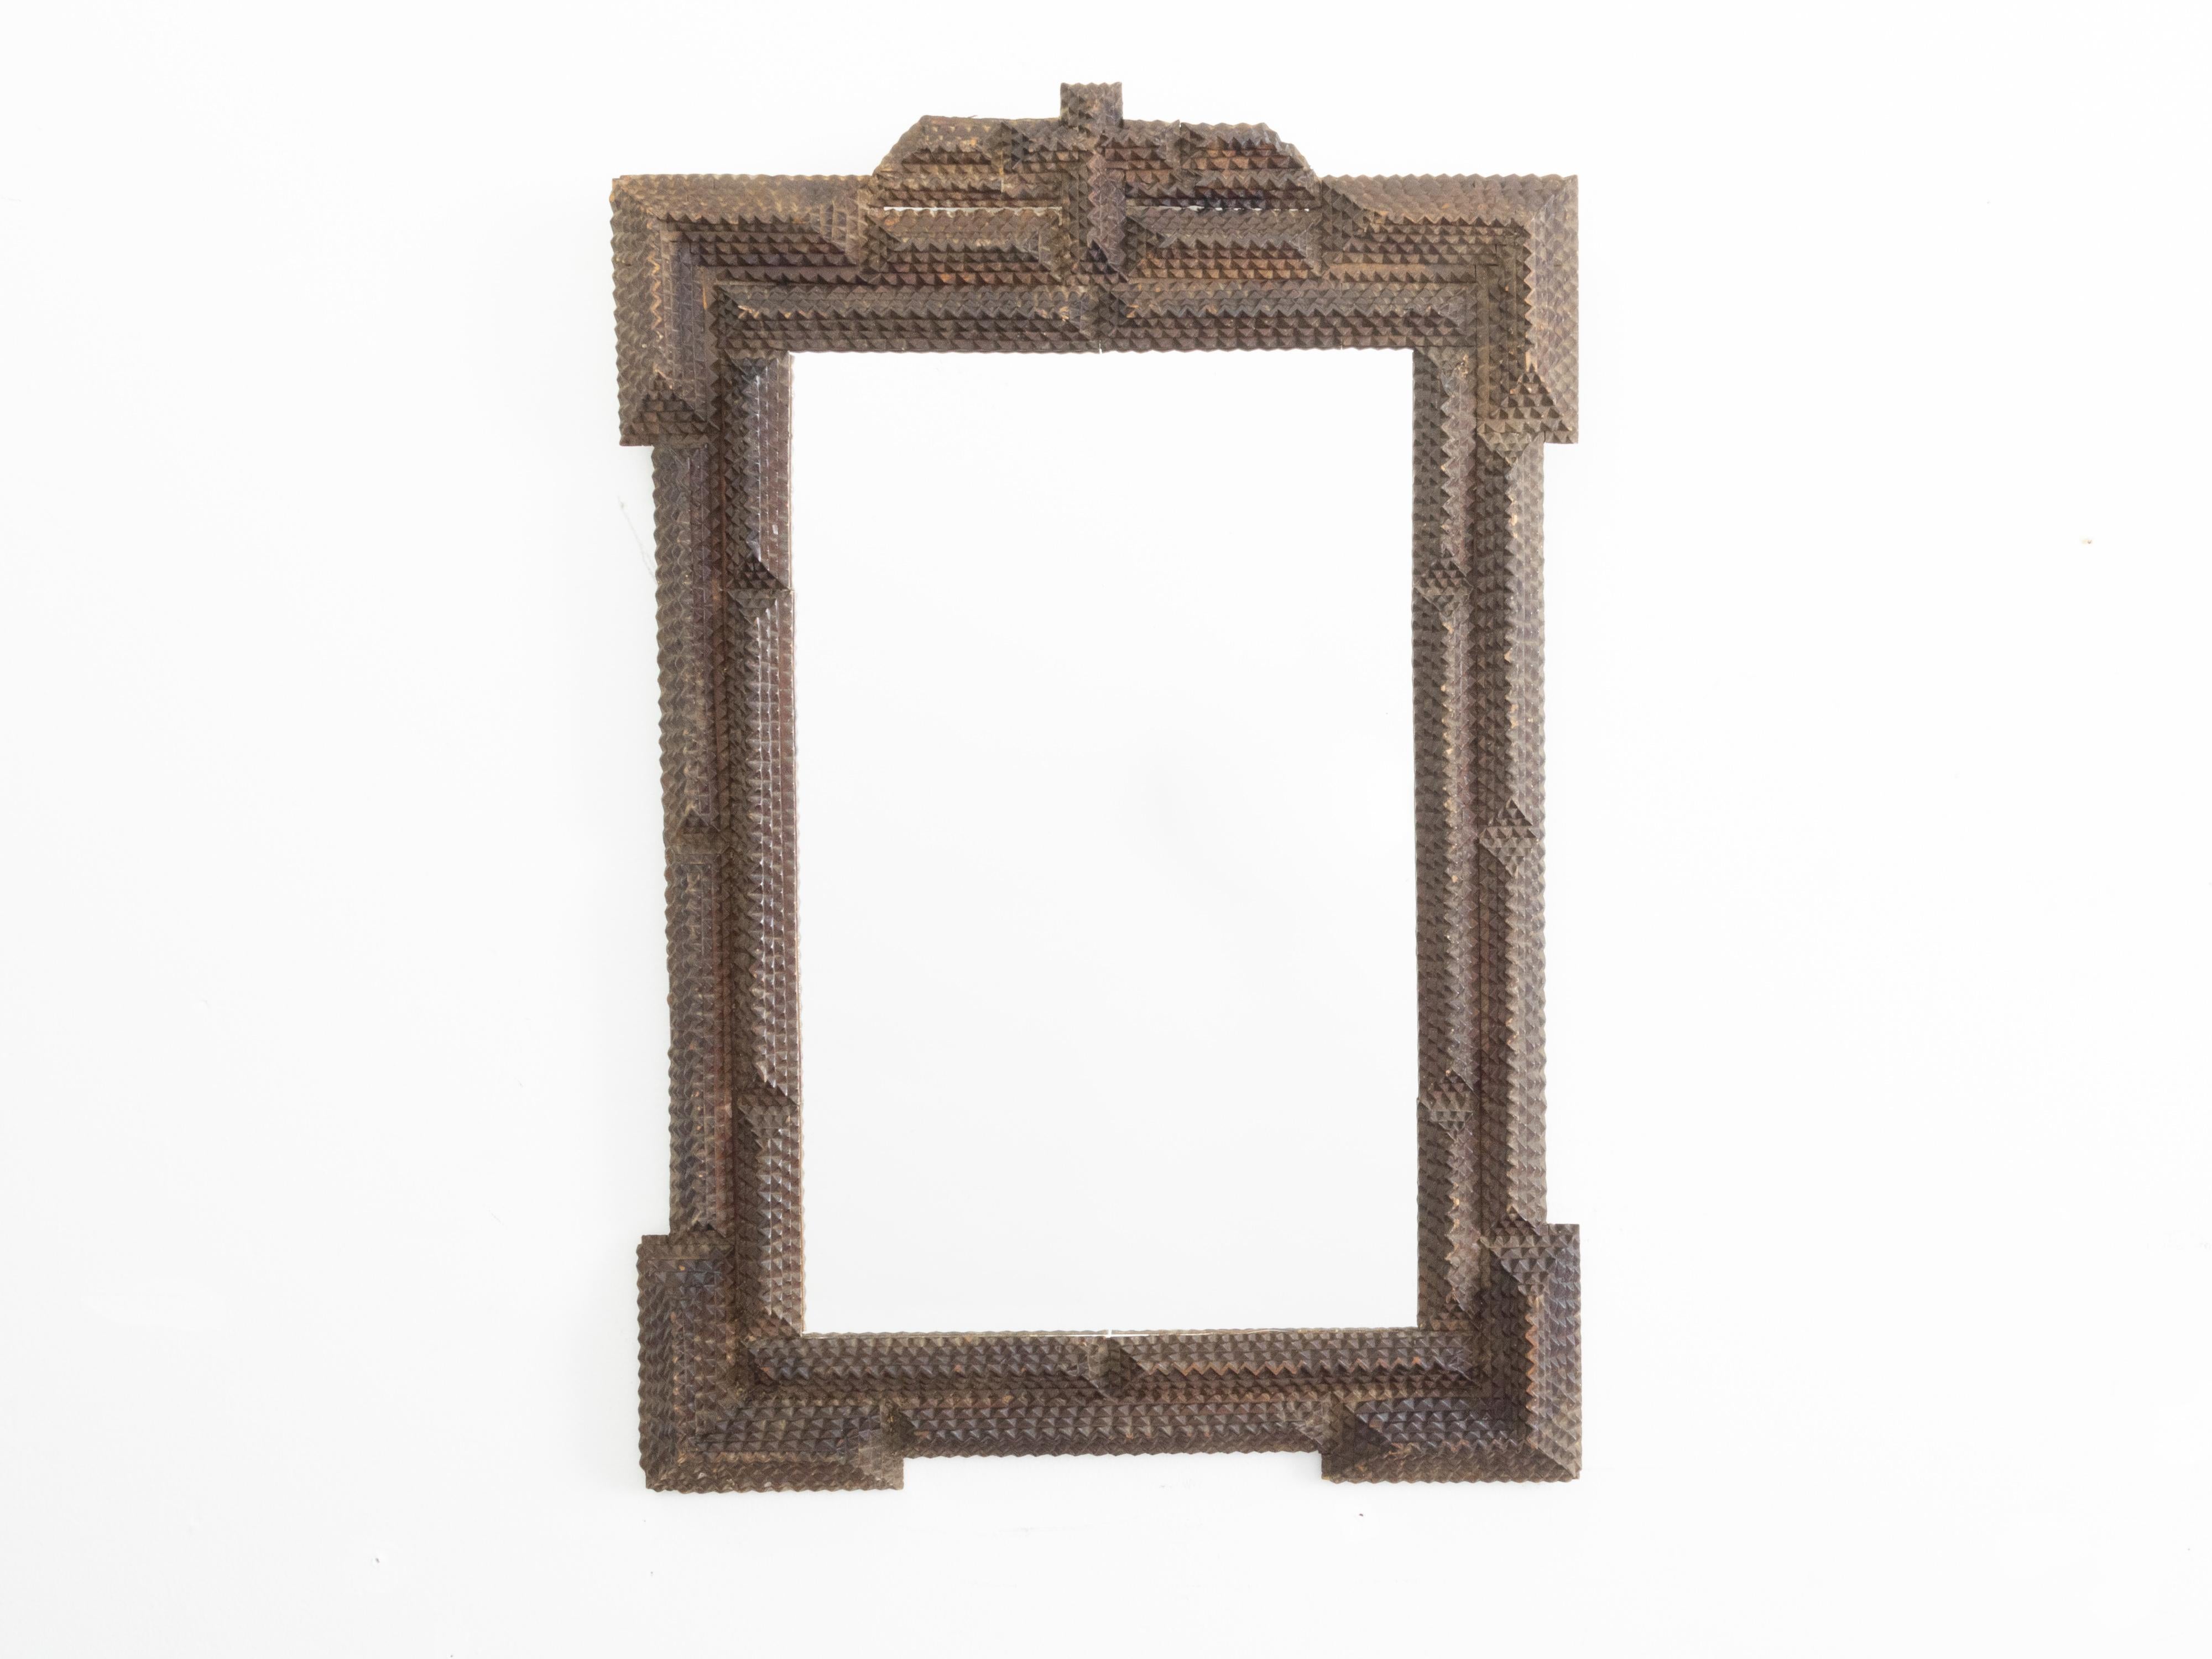 A French Tramp Art hand carved mirror from the early 20th century, with raised motifs. Created in France during the Turn of the Century, this wooden mirror presents the stylistic characteristics typical of the Tramp Art style. A simple, linear